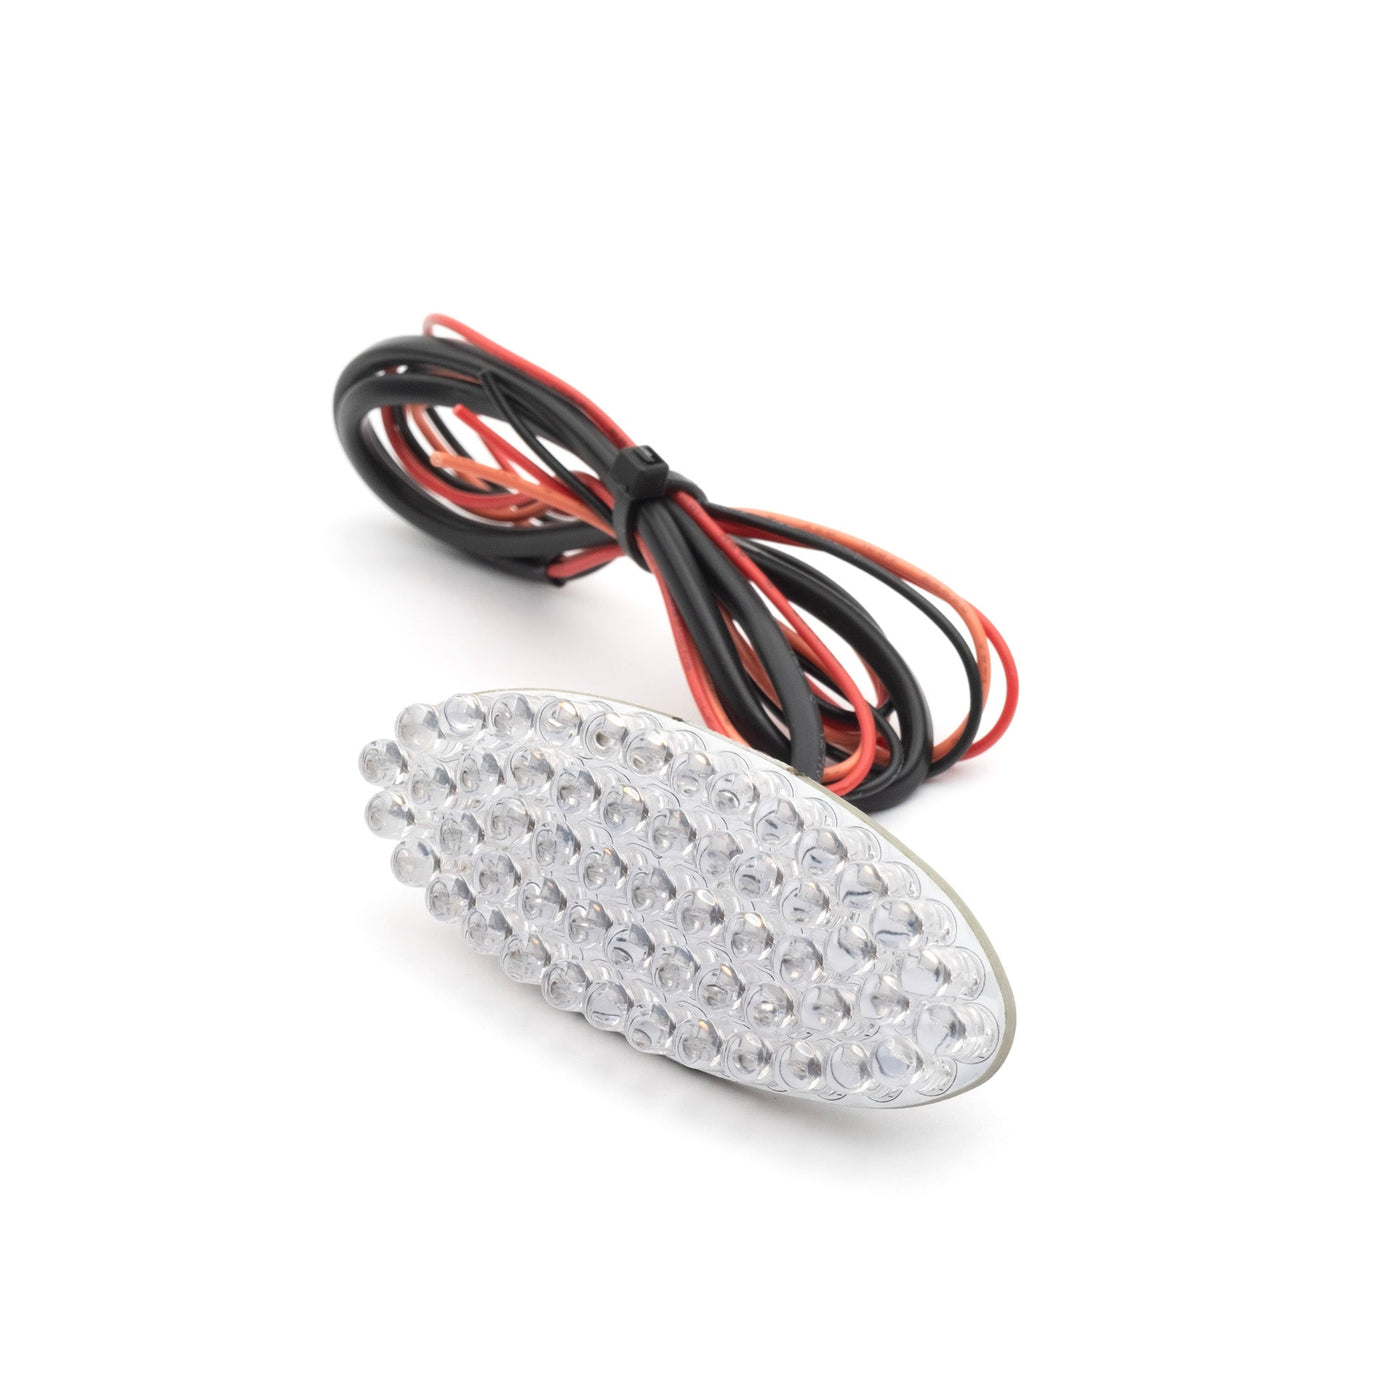 Prism Tail Light LED Replacement - Prism Supply